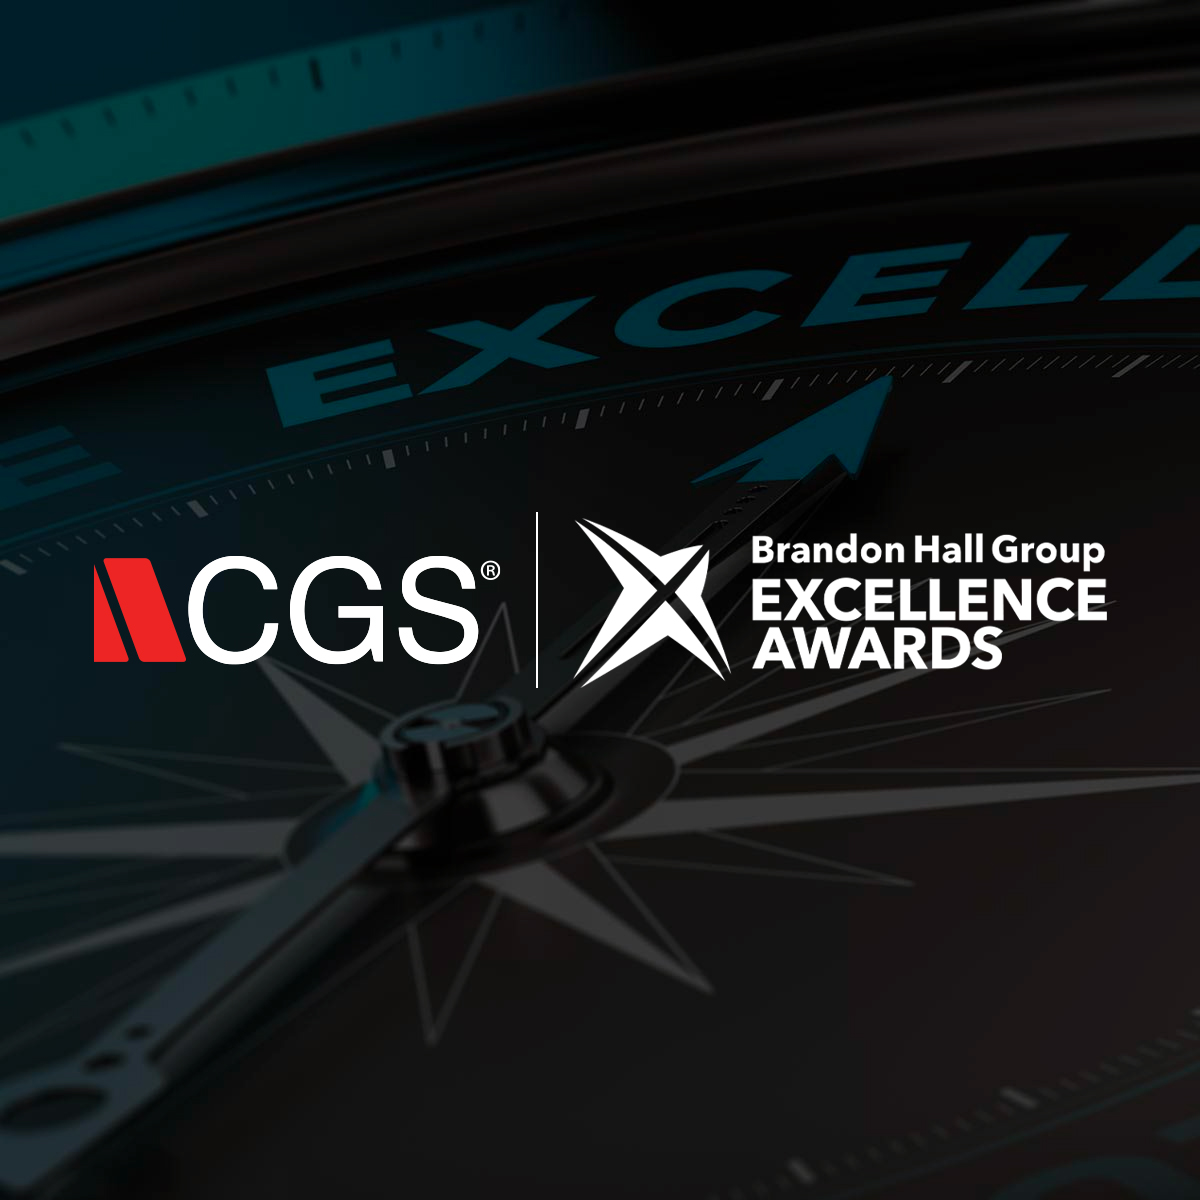 CGS Microsoft Excellence Awards